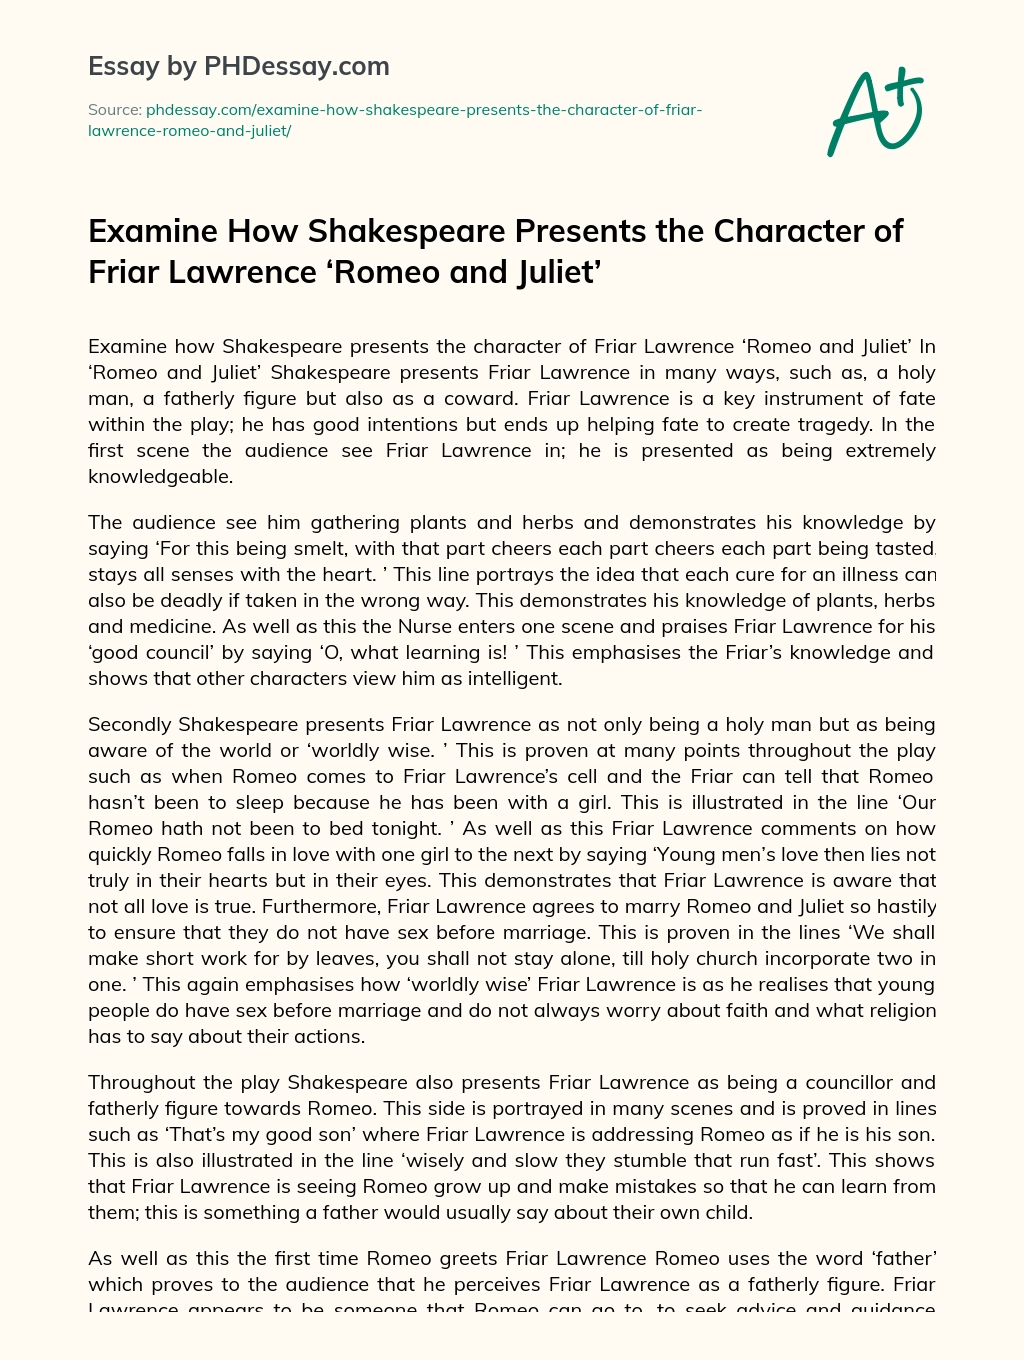 Examine How Shakespeare Presents the Character of Friar Lawrence ‘Romeo and Juliet’ essay